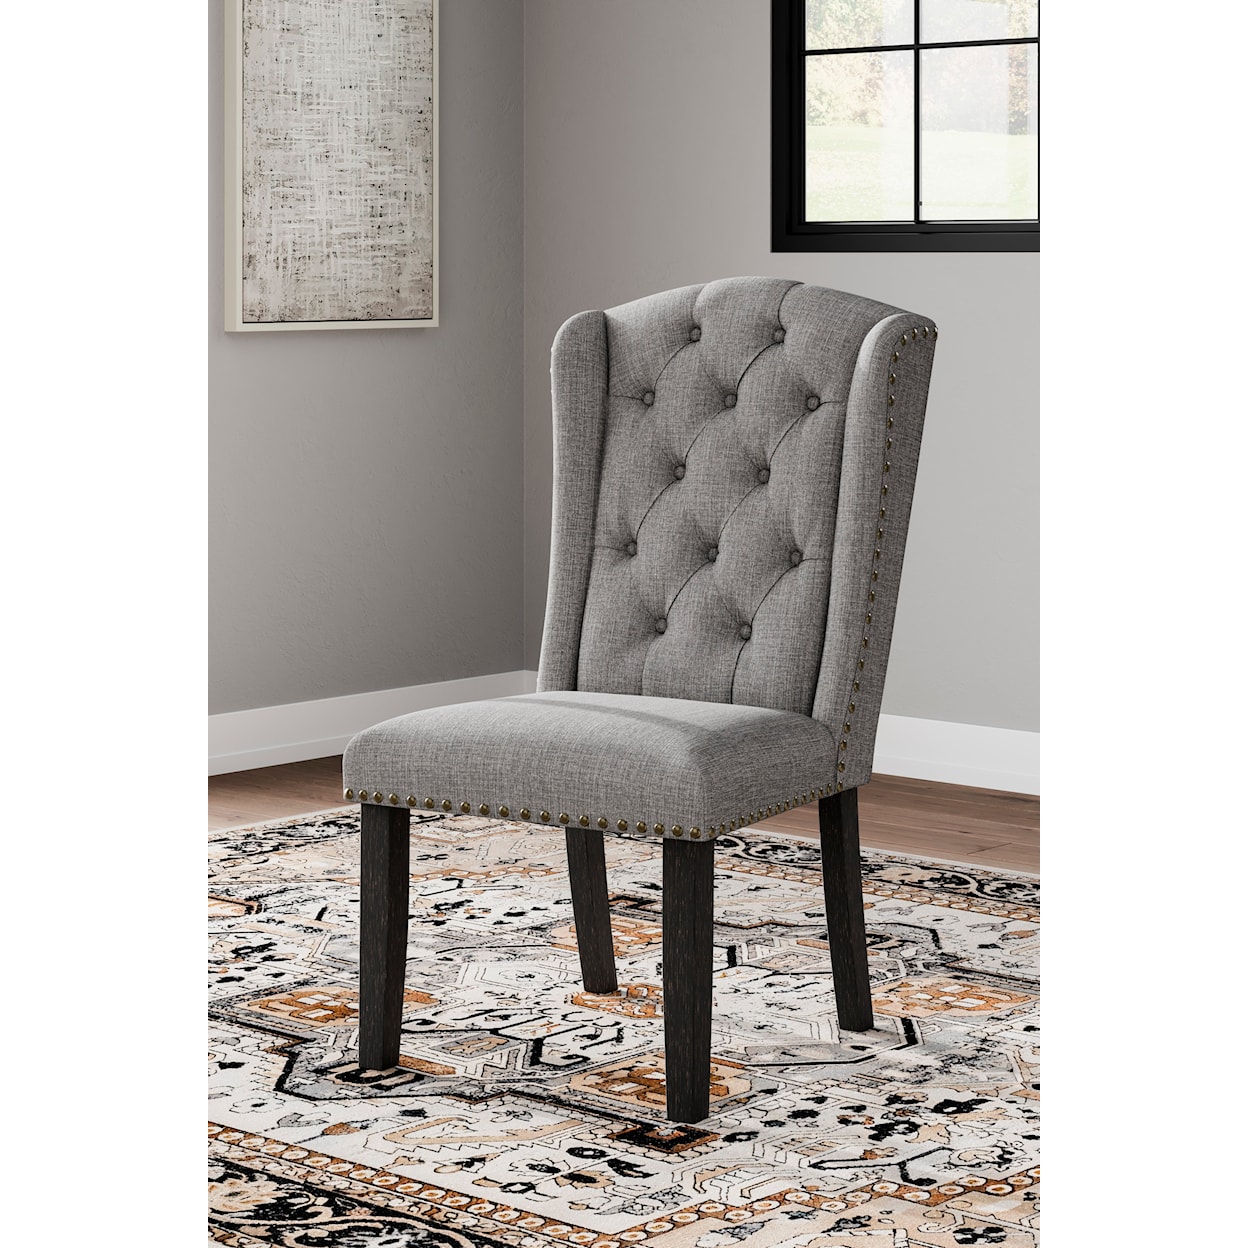 Benchcraft Jeanette Dining Chair